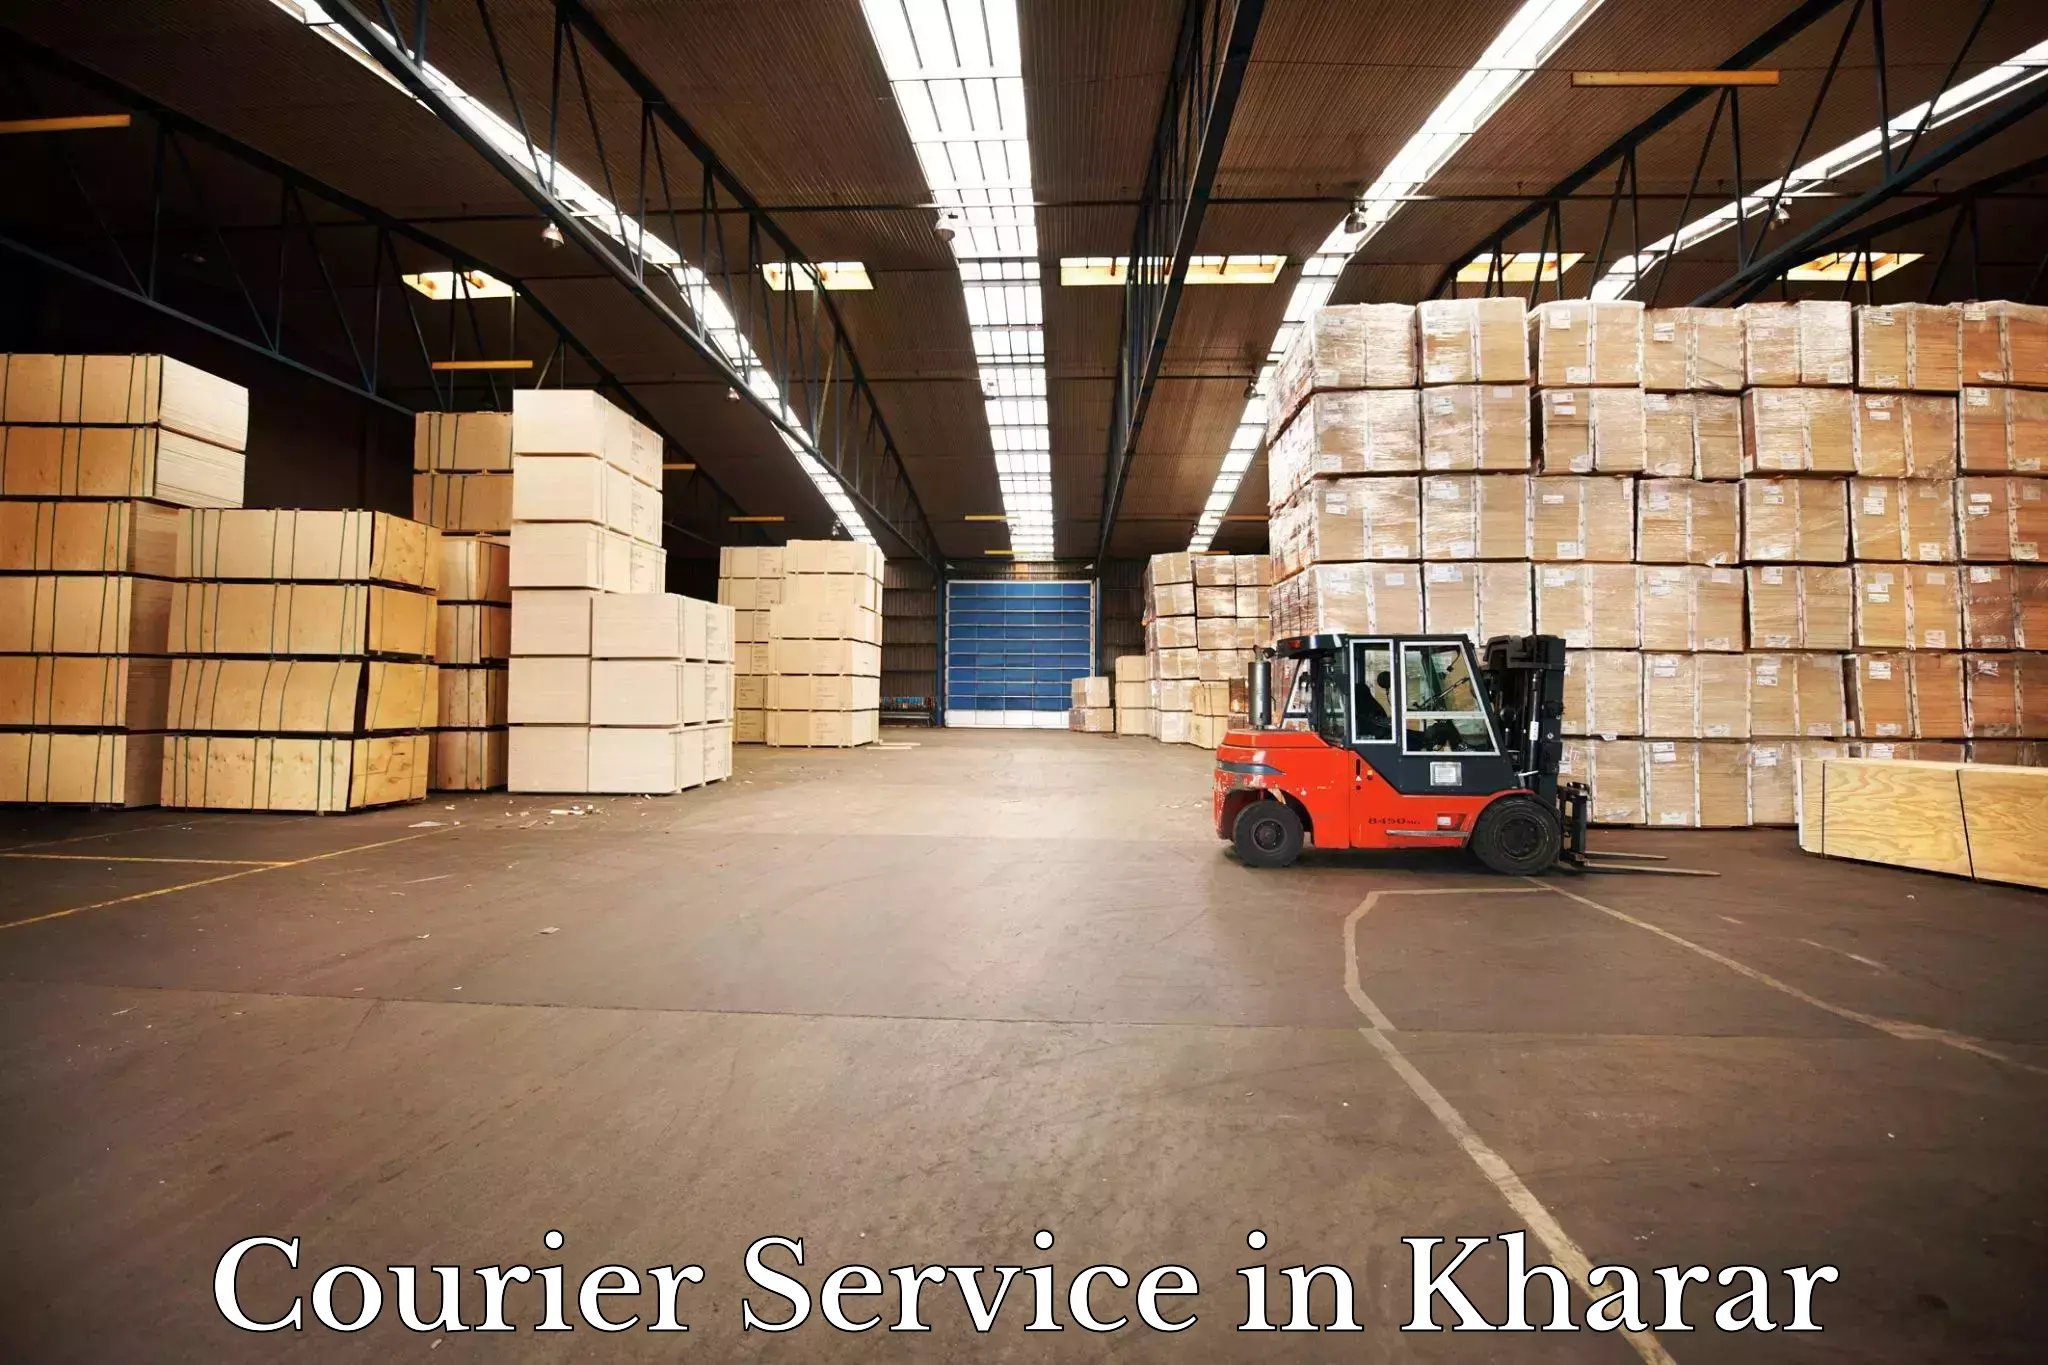 Expedited parcel delivery in Kharar